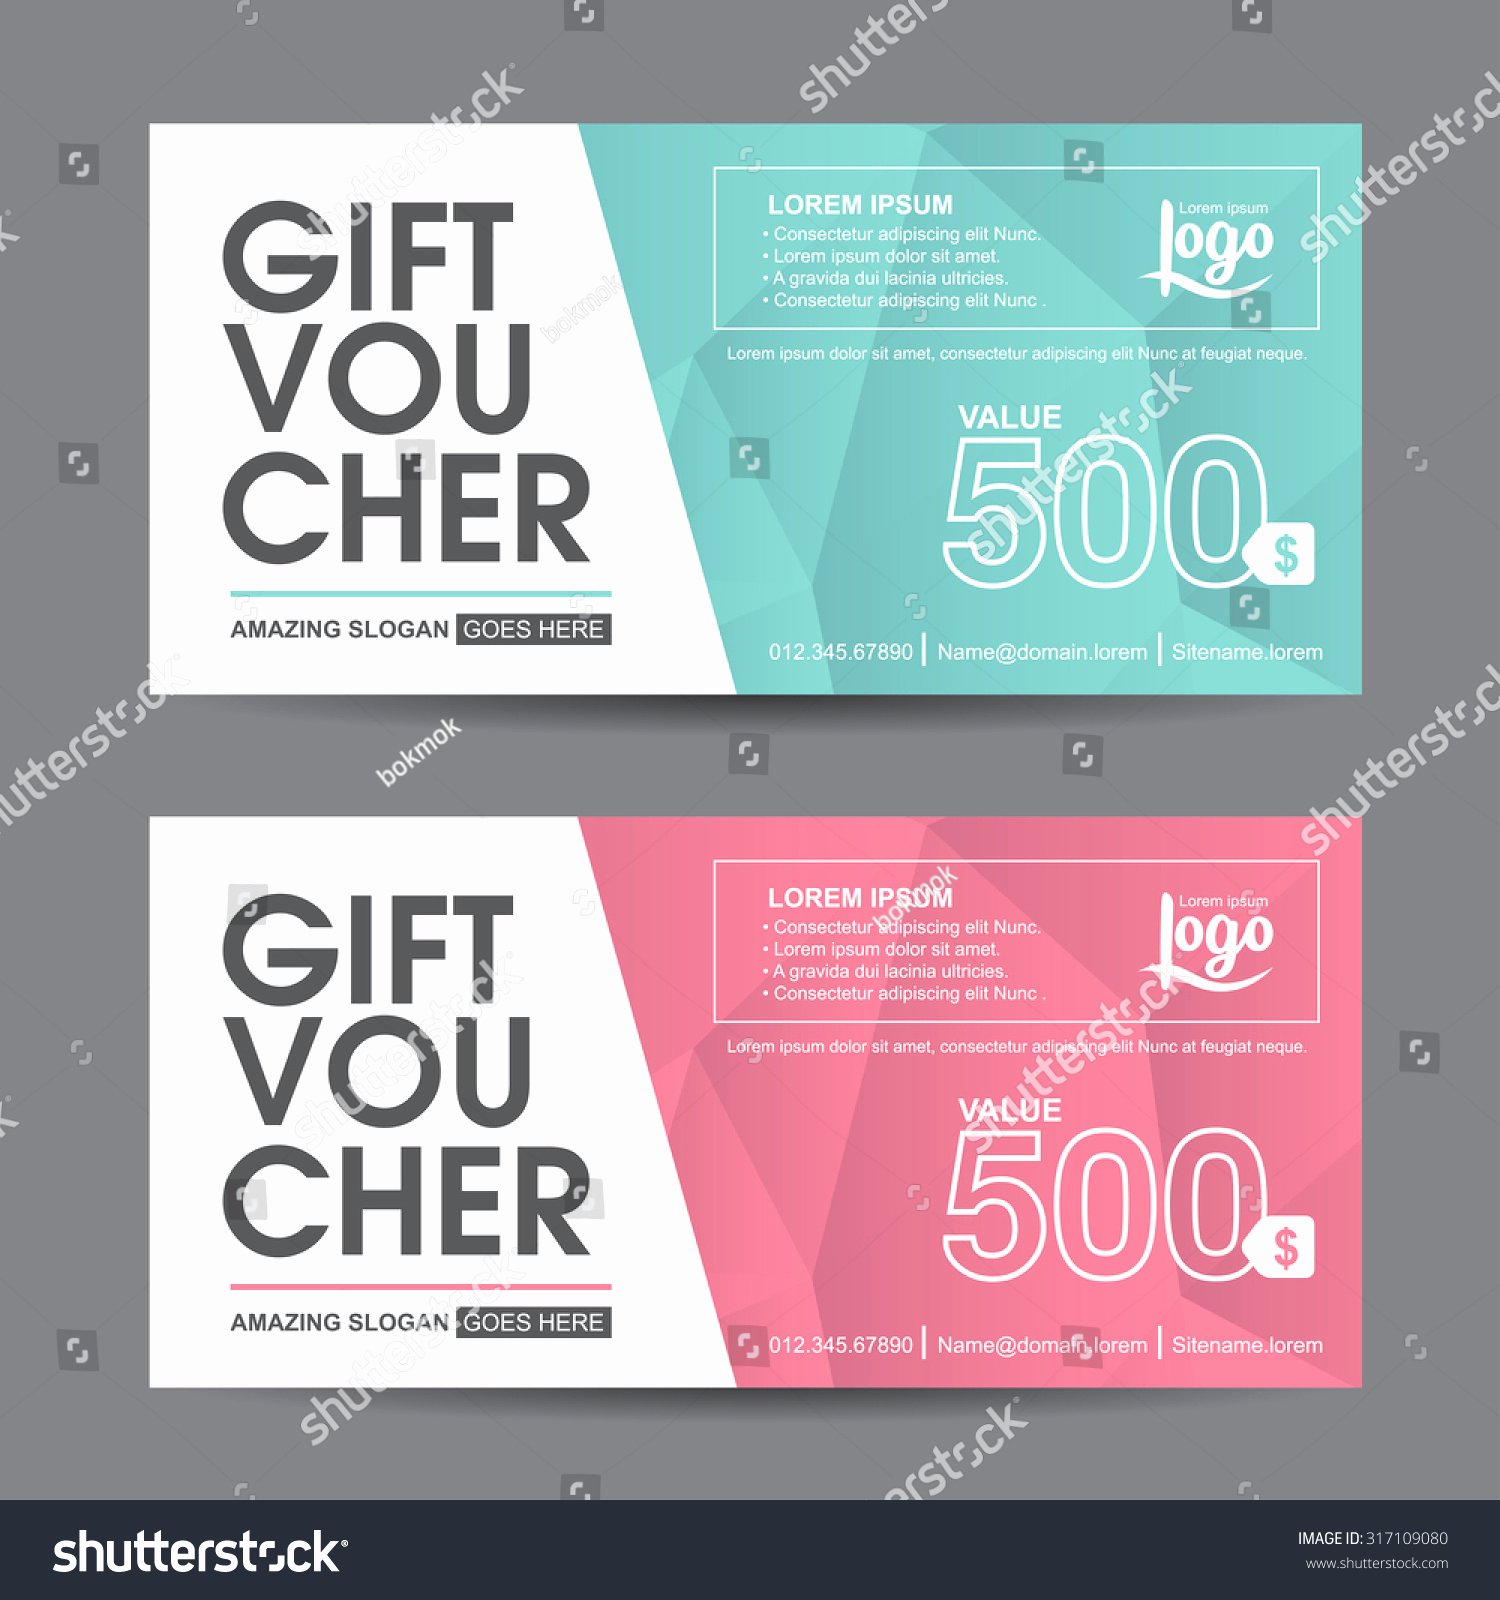 Cute Gift Certificate Template Elegant Gift Voucher Template Colorful Patterncute Gift Stock